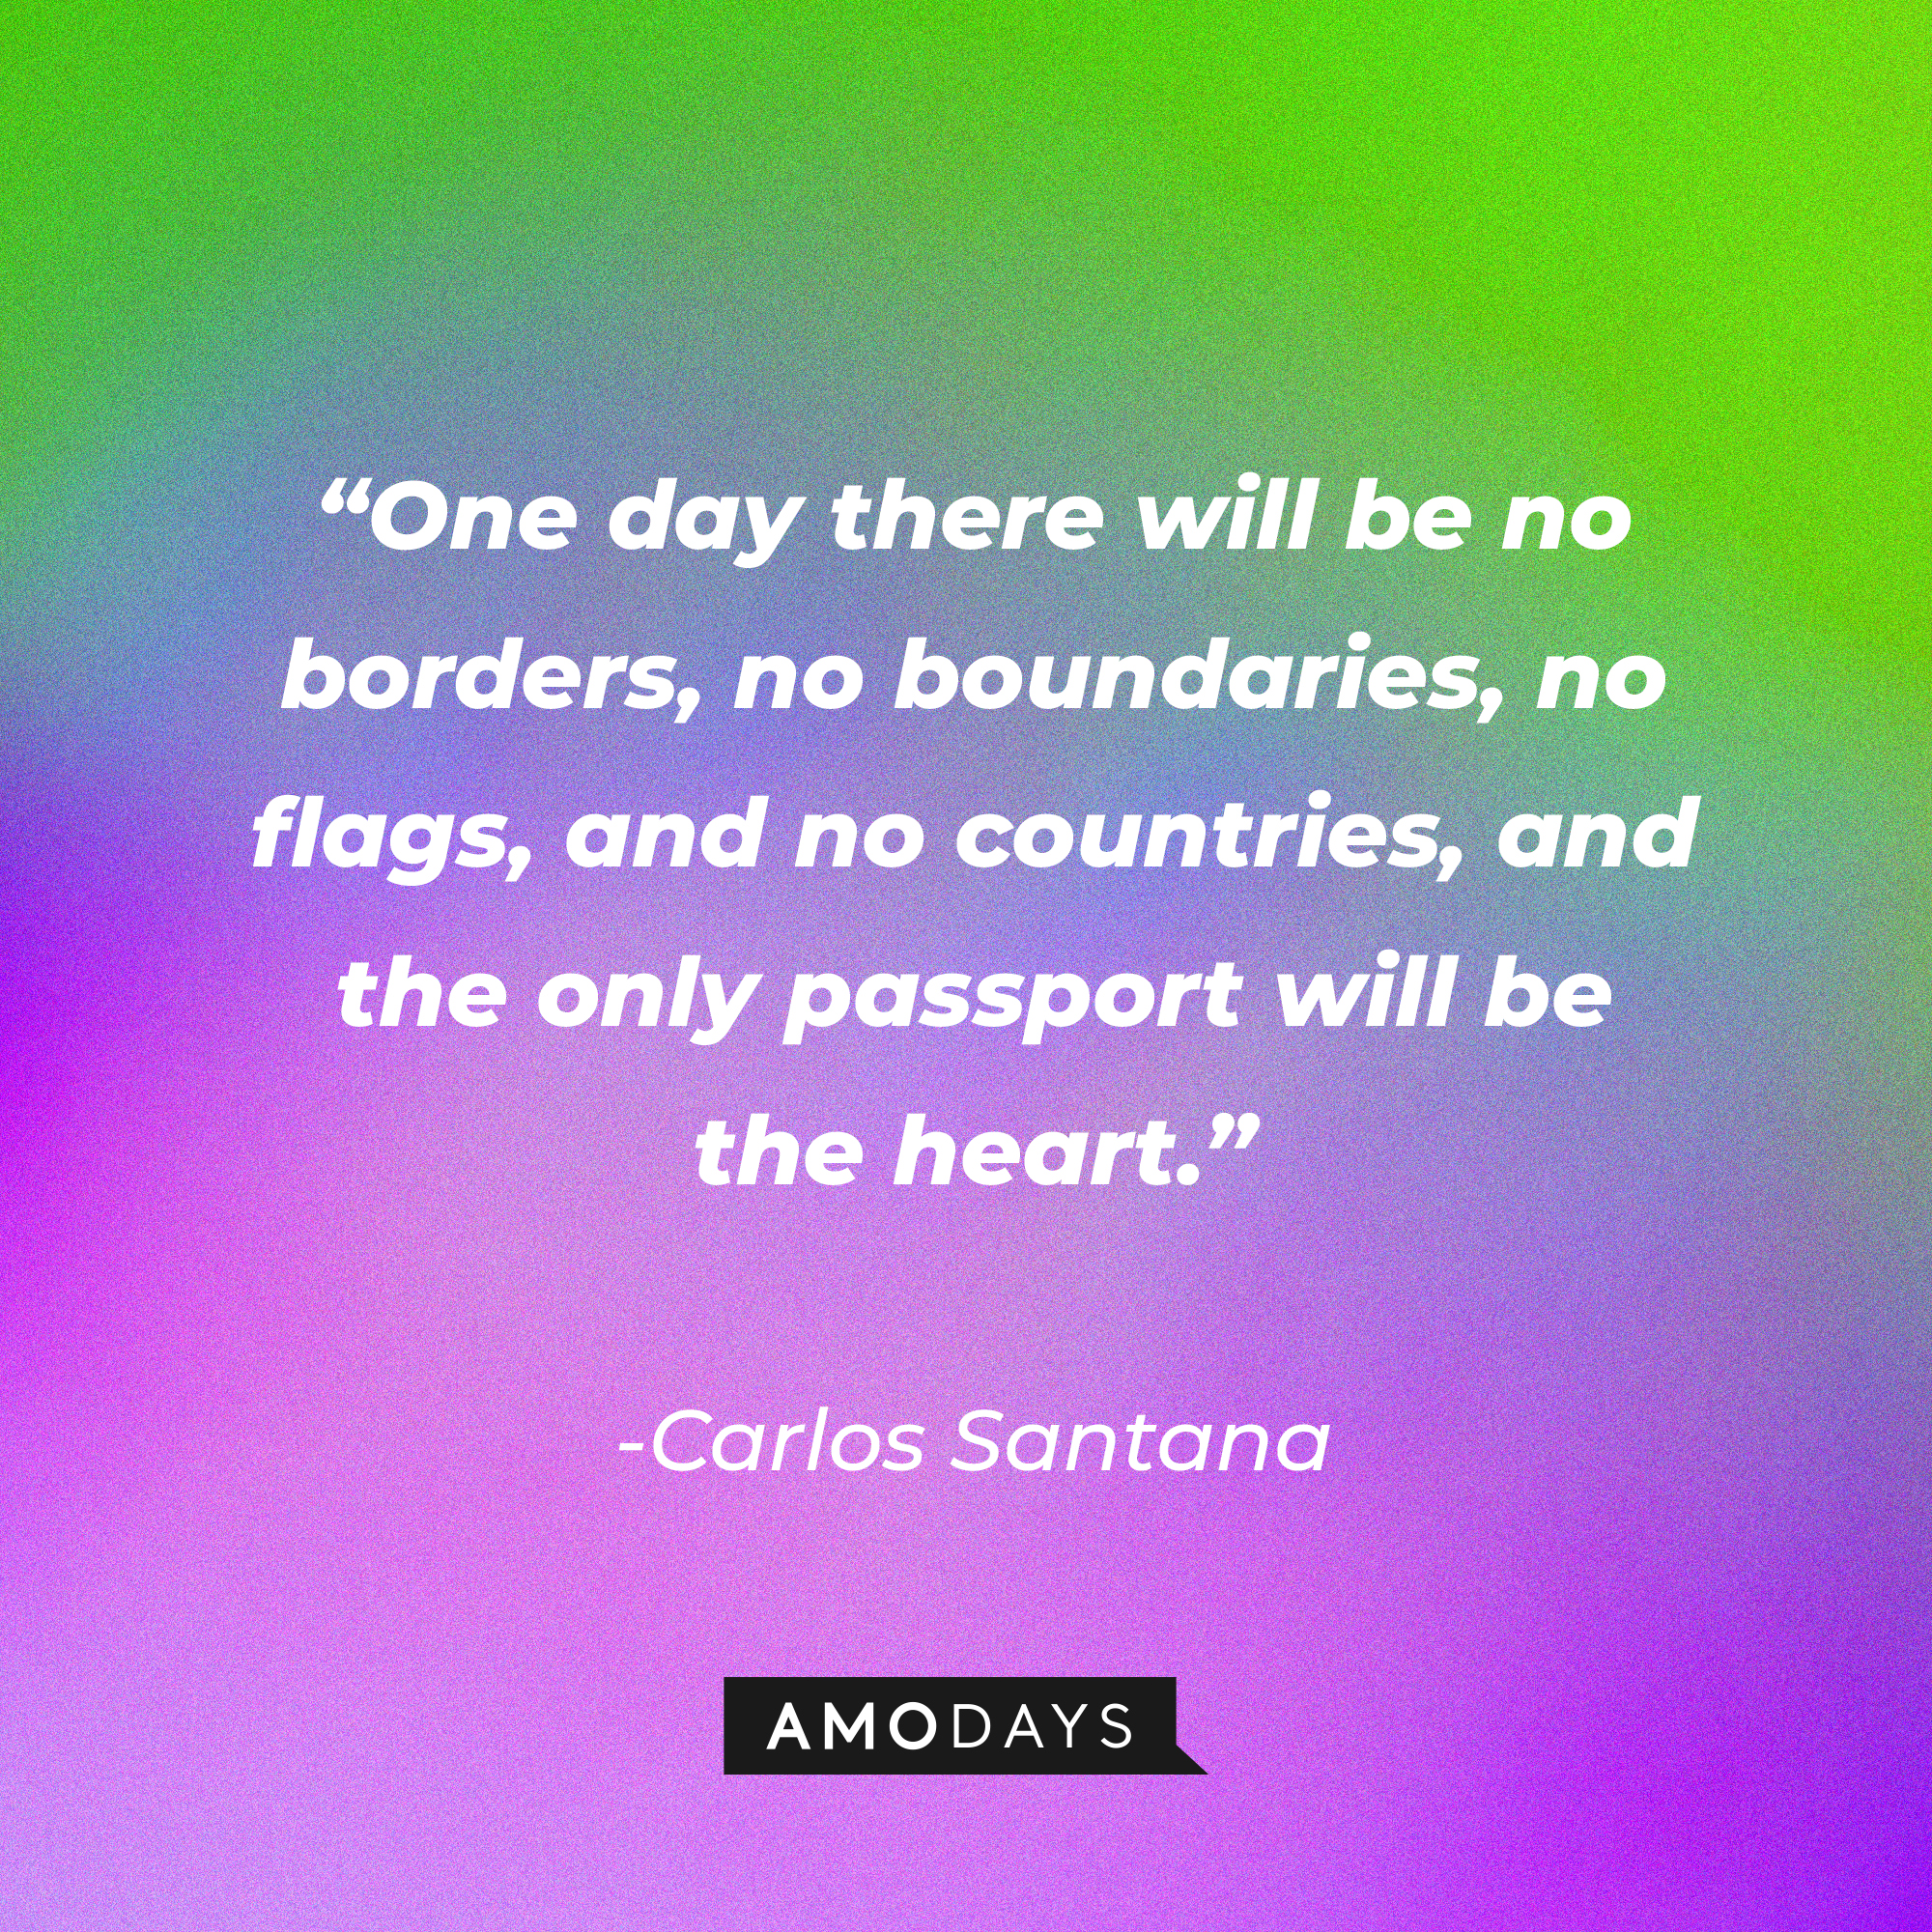 Carlos Santana’s quote:“One day there will be no borders, no boundaries, no flags, and no countries, and the only passport will be the heart.”┃Source: AmoDays